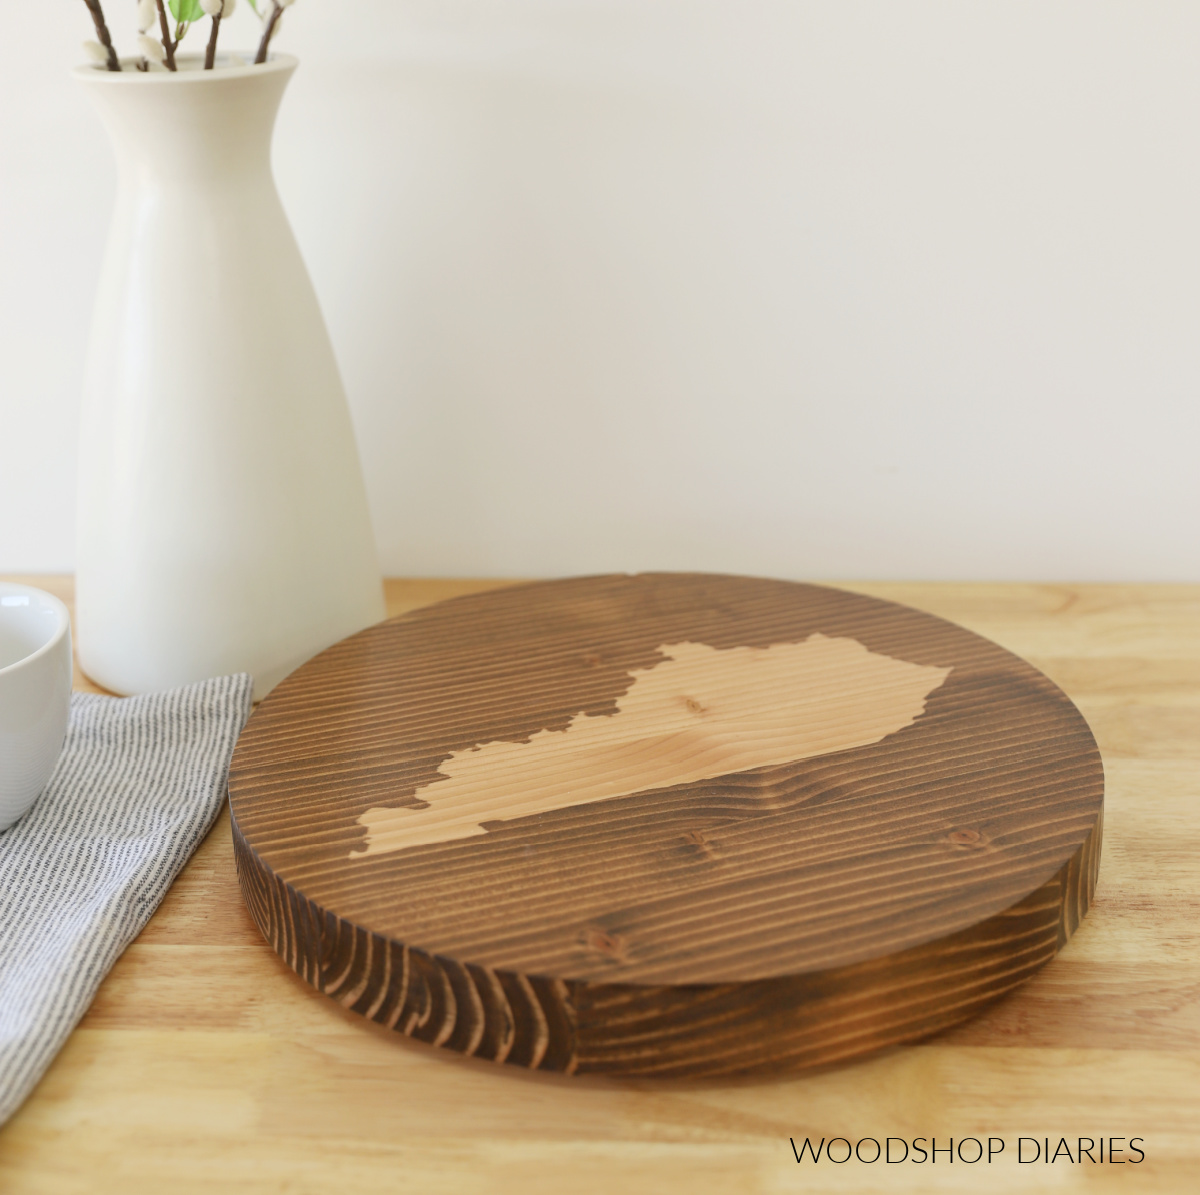 DIY Wooden Lazy Susan  From a Single 2x4 Board